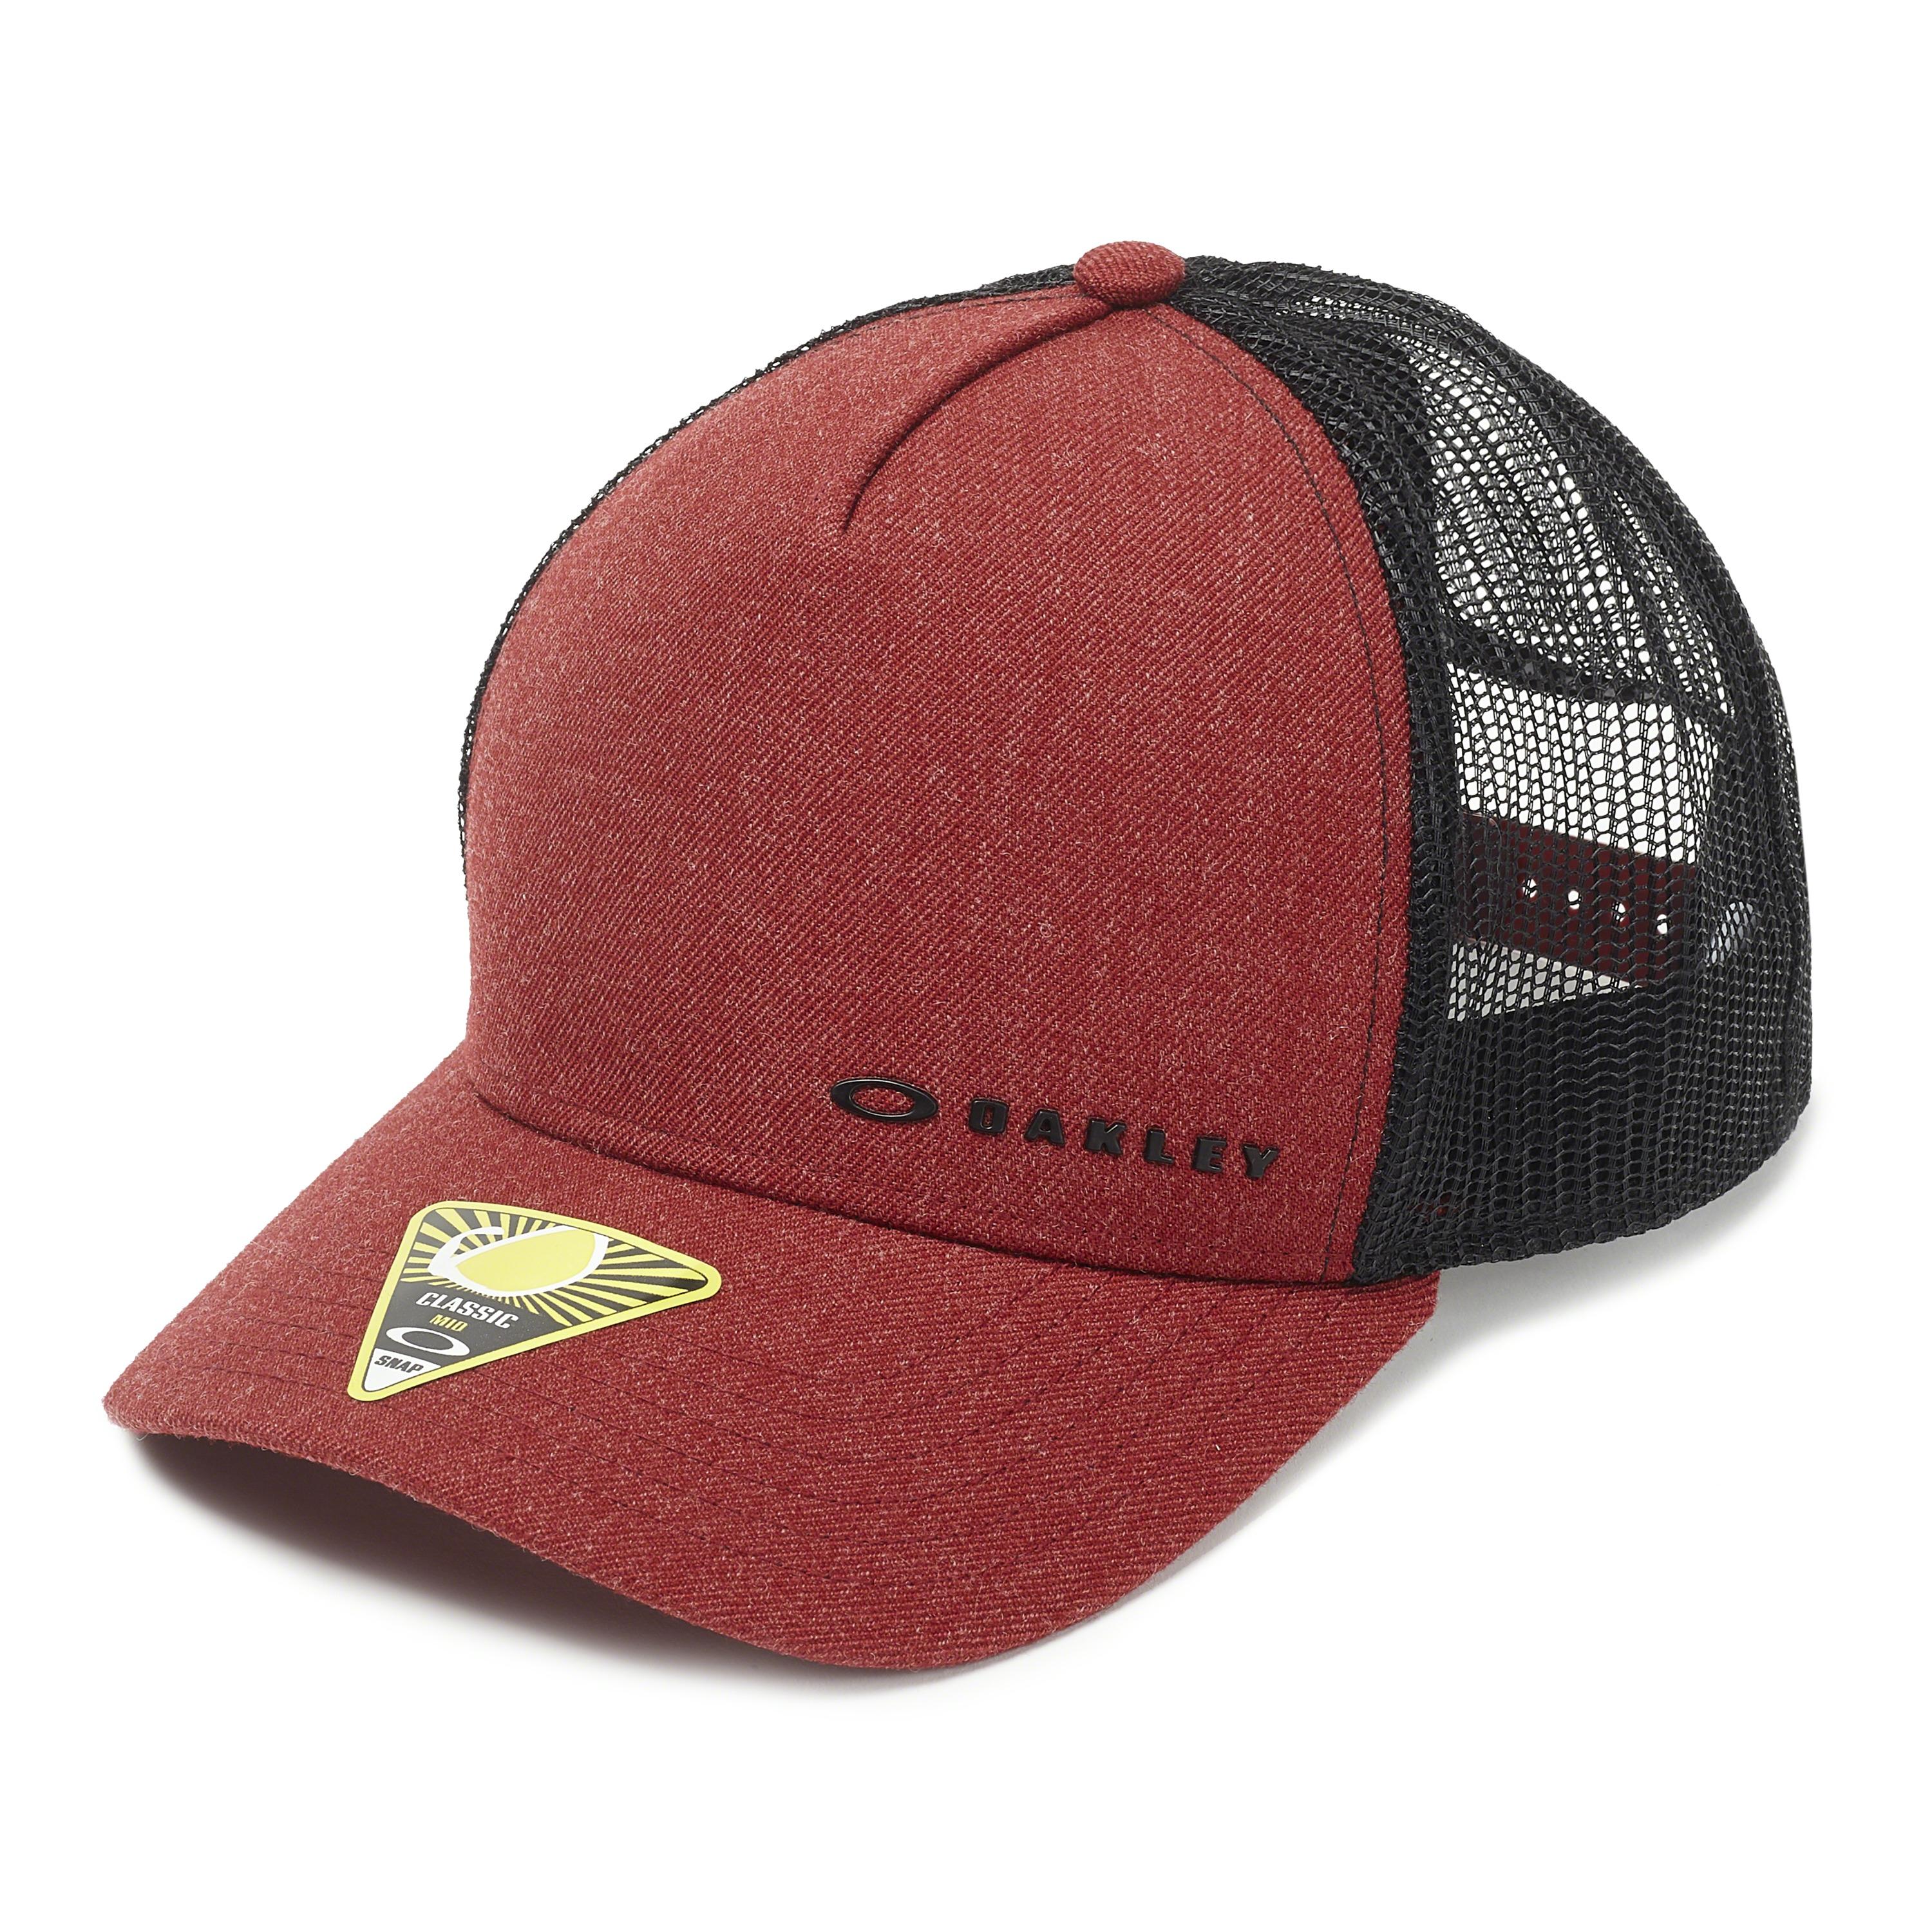 Oakley Synthetic Chalten Cap in Iron Red (Red) for Men - Lyst